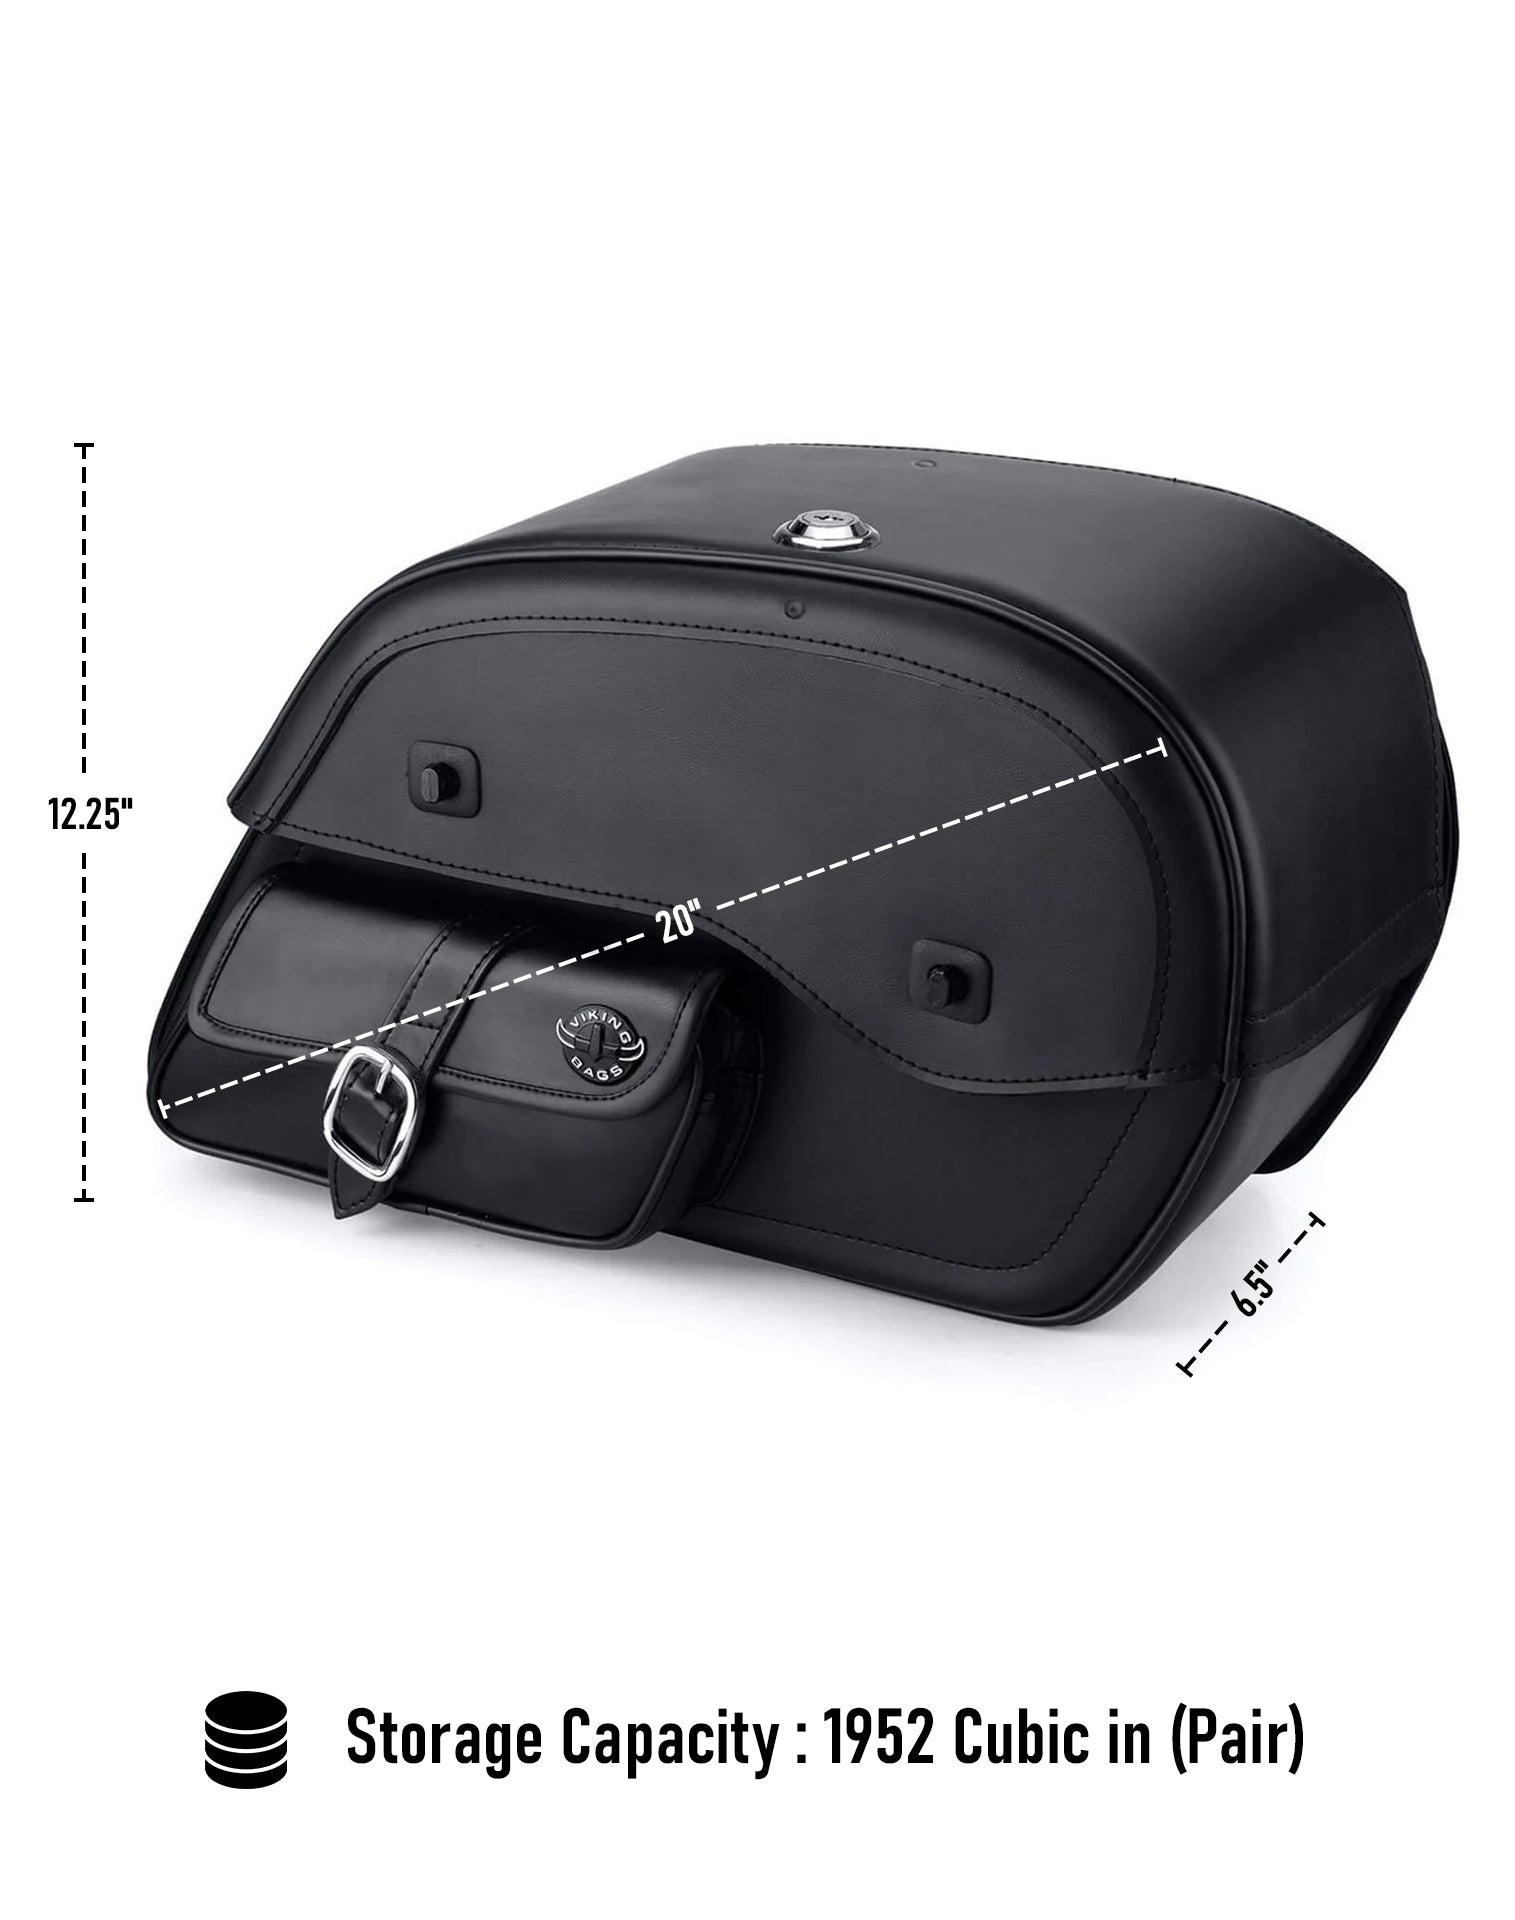 Viking Essential Side Pocket Large Yamaha V Star 950 Tourer Leather Motorcycle Saddlebags Can Store Your Ridings Gears